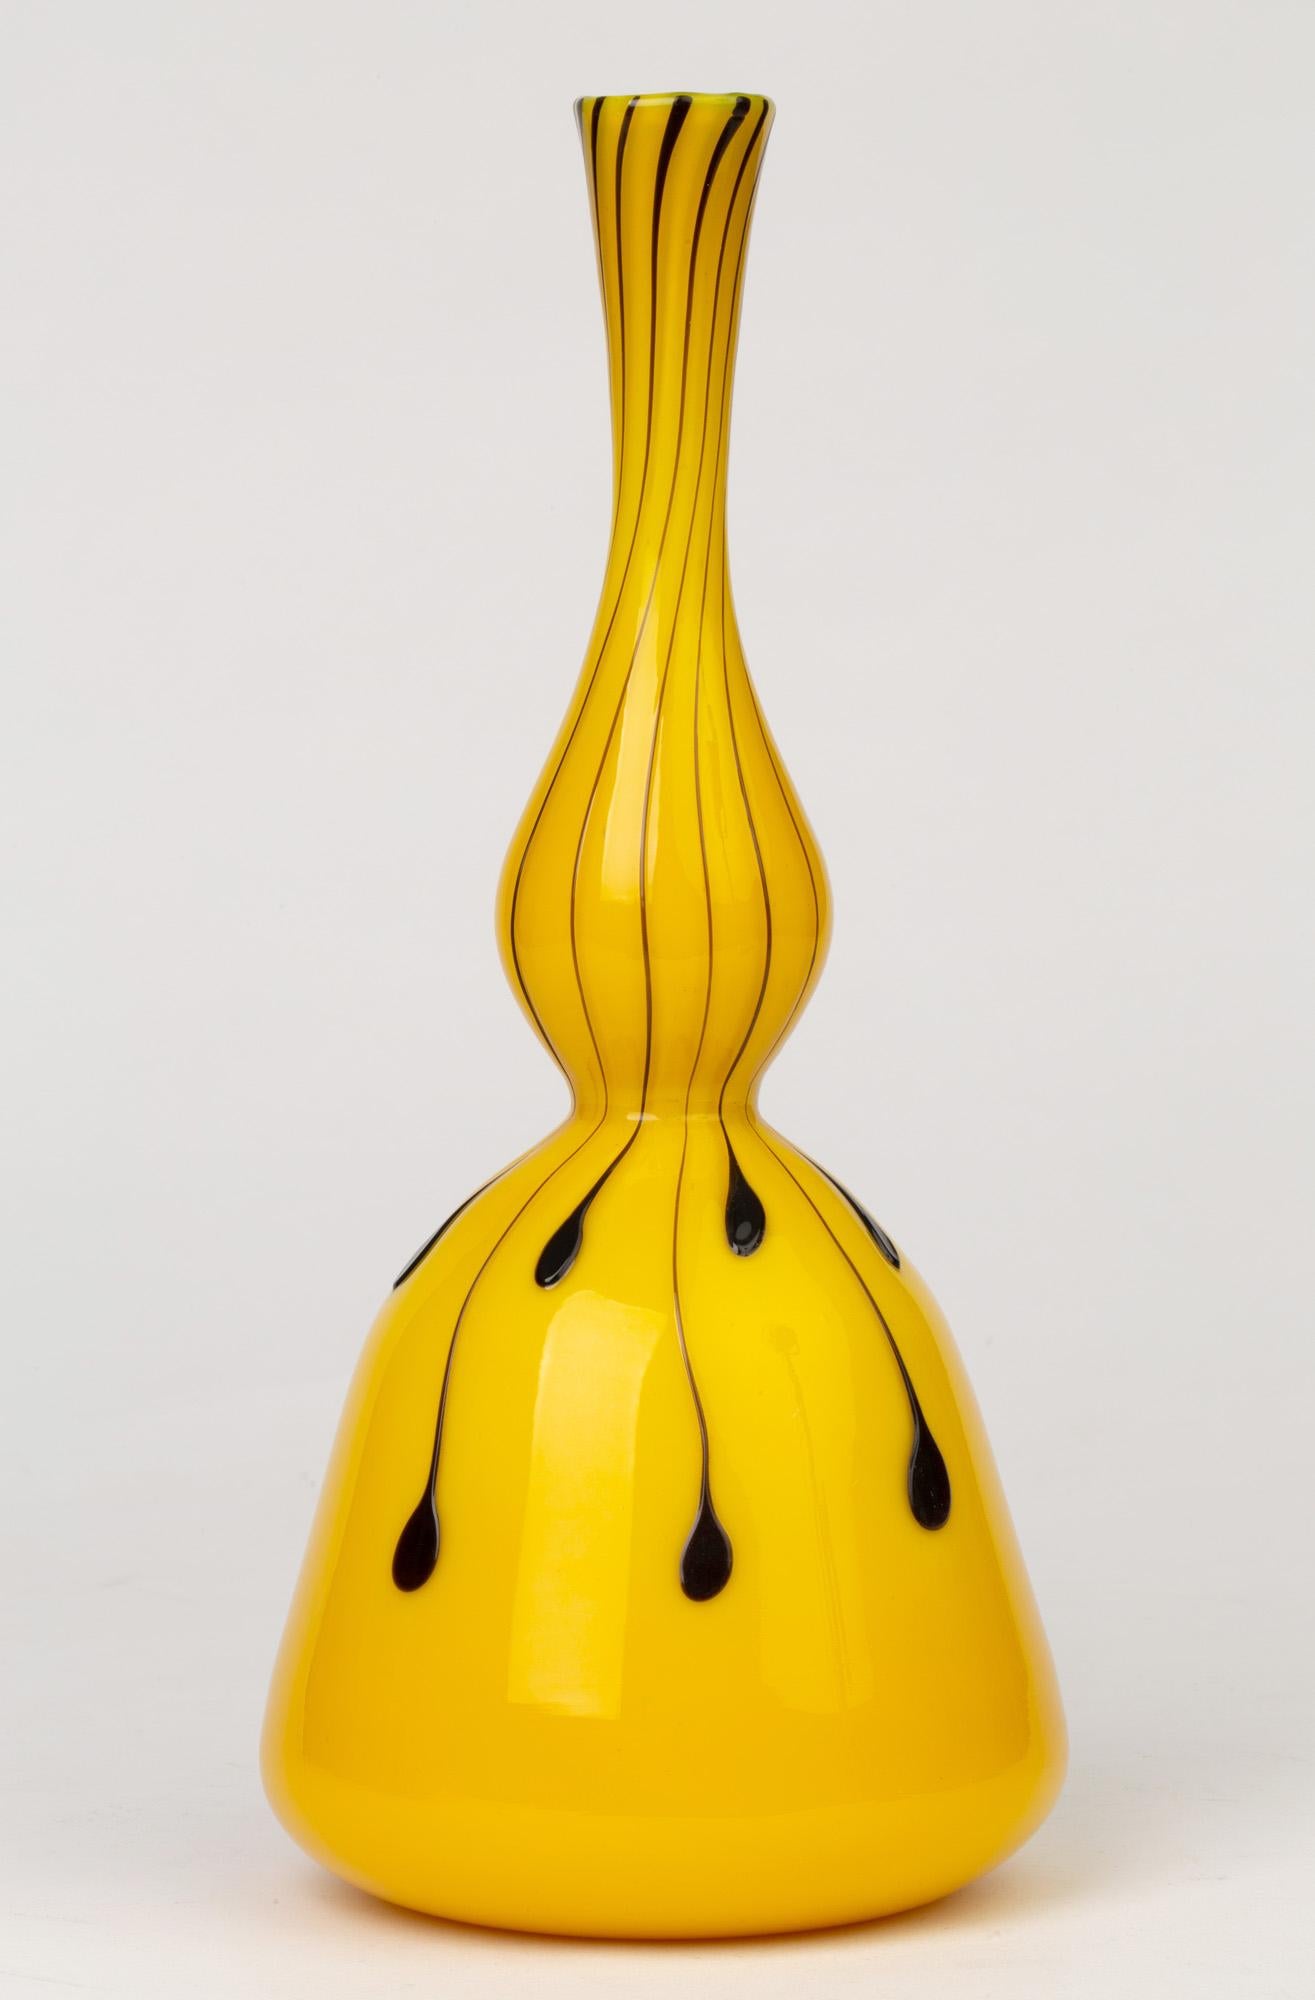 A stunning Italian Murano hand blown art glass vase in cased yellow glass with applied purple glass droplets attributed to Fratelli Toso and dating from circa 1950. The mallet shaped vase has a wide rounded base with a narrow tall elegant neck with